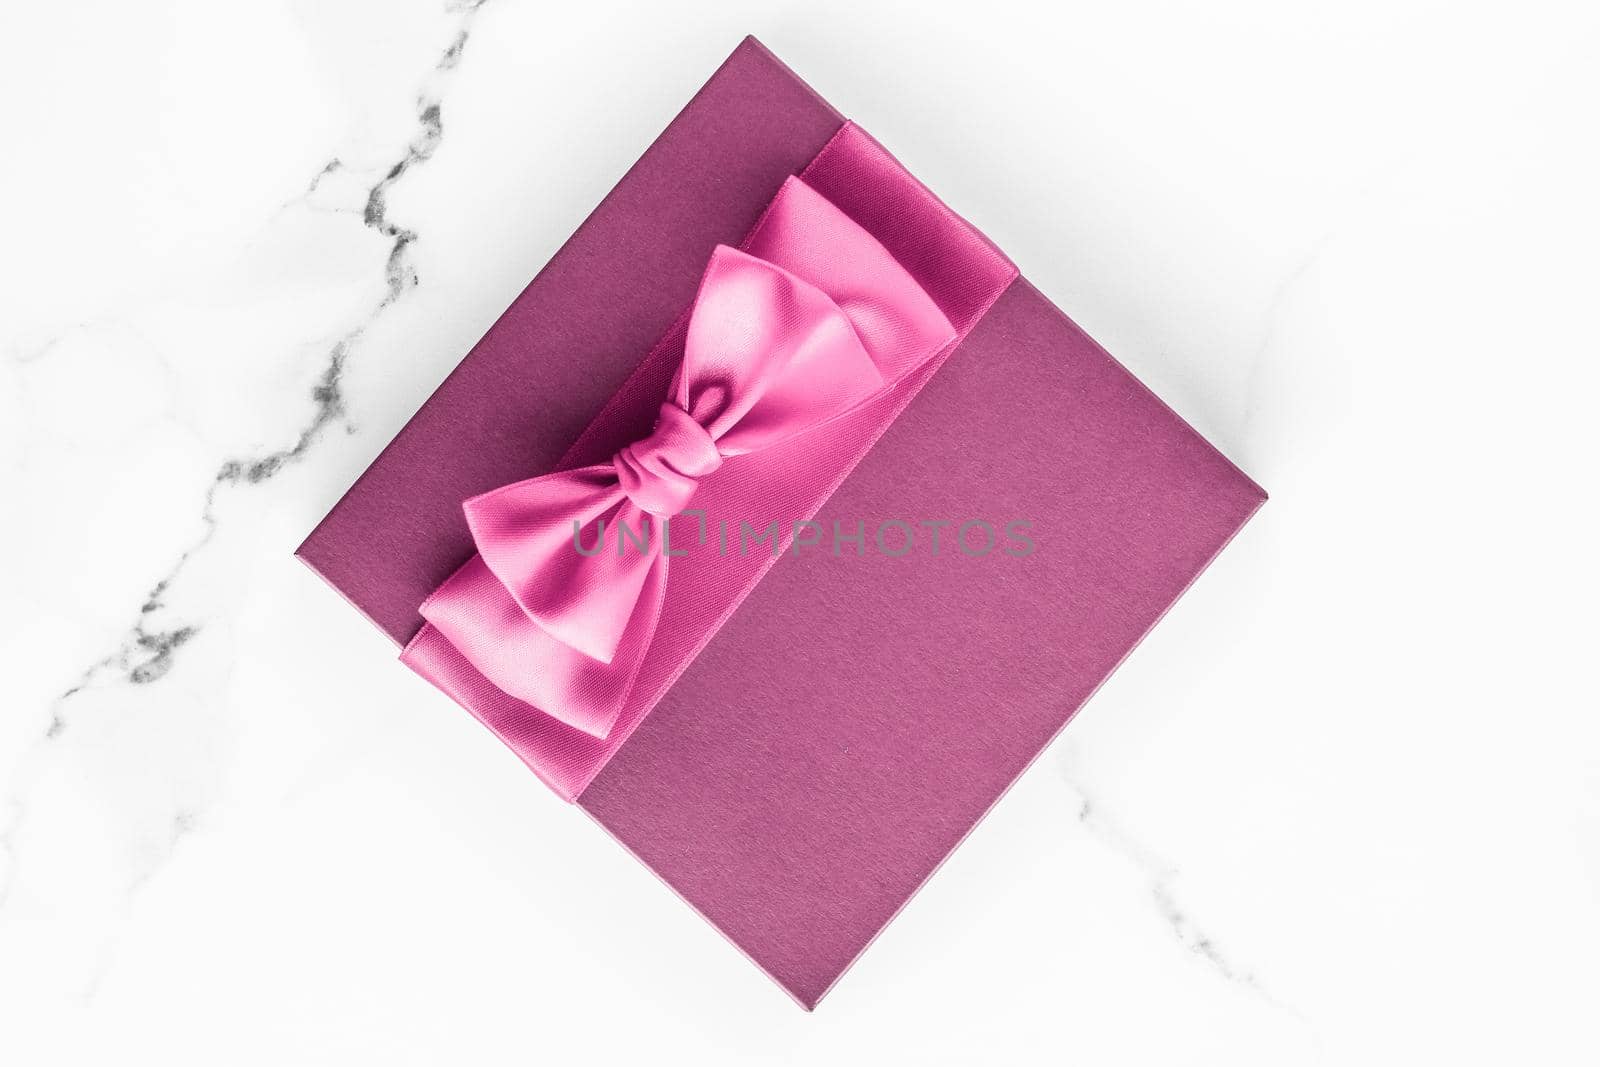 Birthday, wedding and girly branding concept - Pink gift box with silk bow on marble background, girl baby shower present and glamour fashion gift for luxury beauty brand, holiday flatlay art design